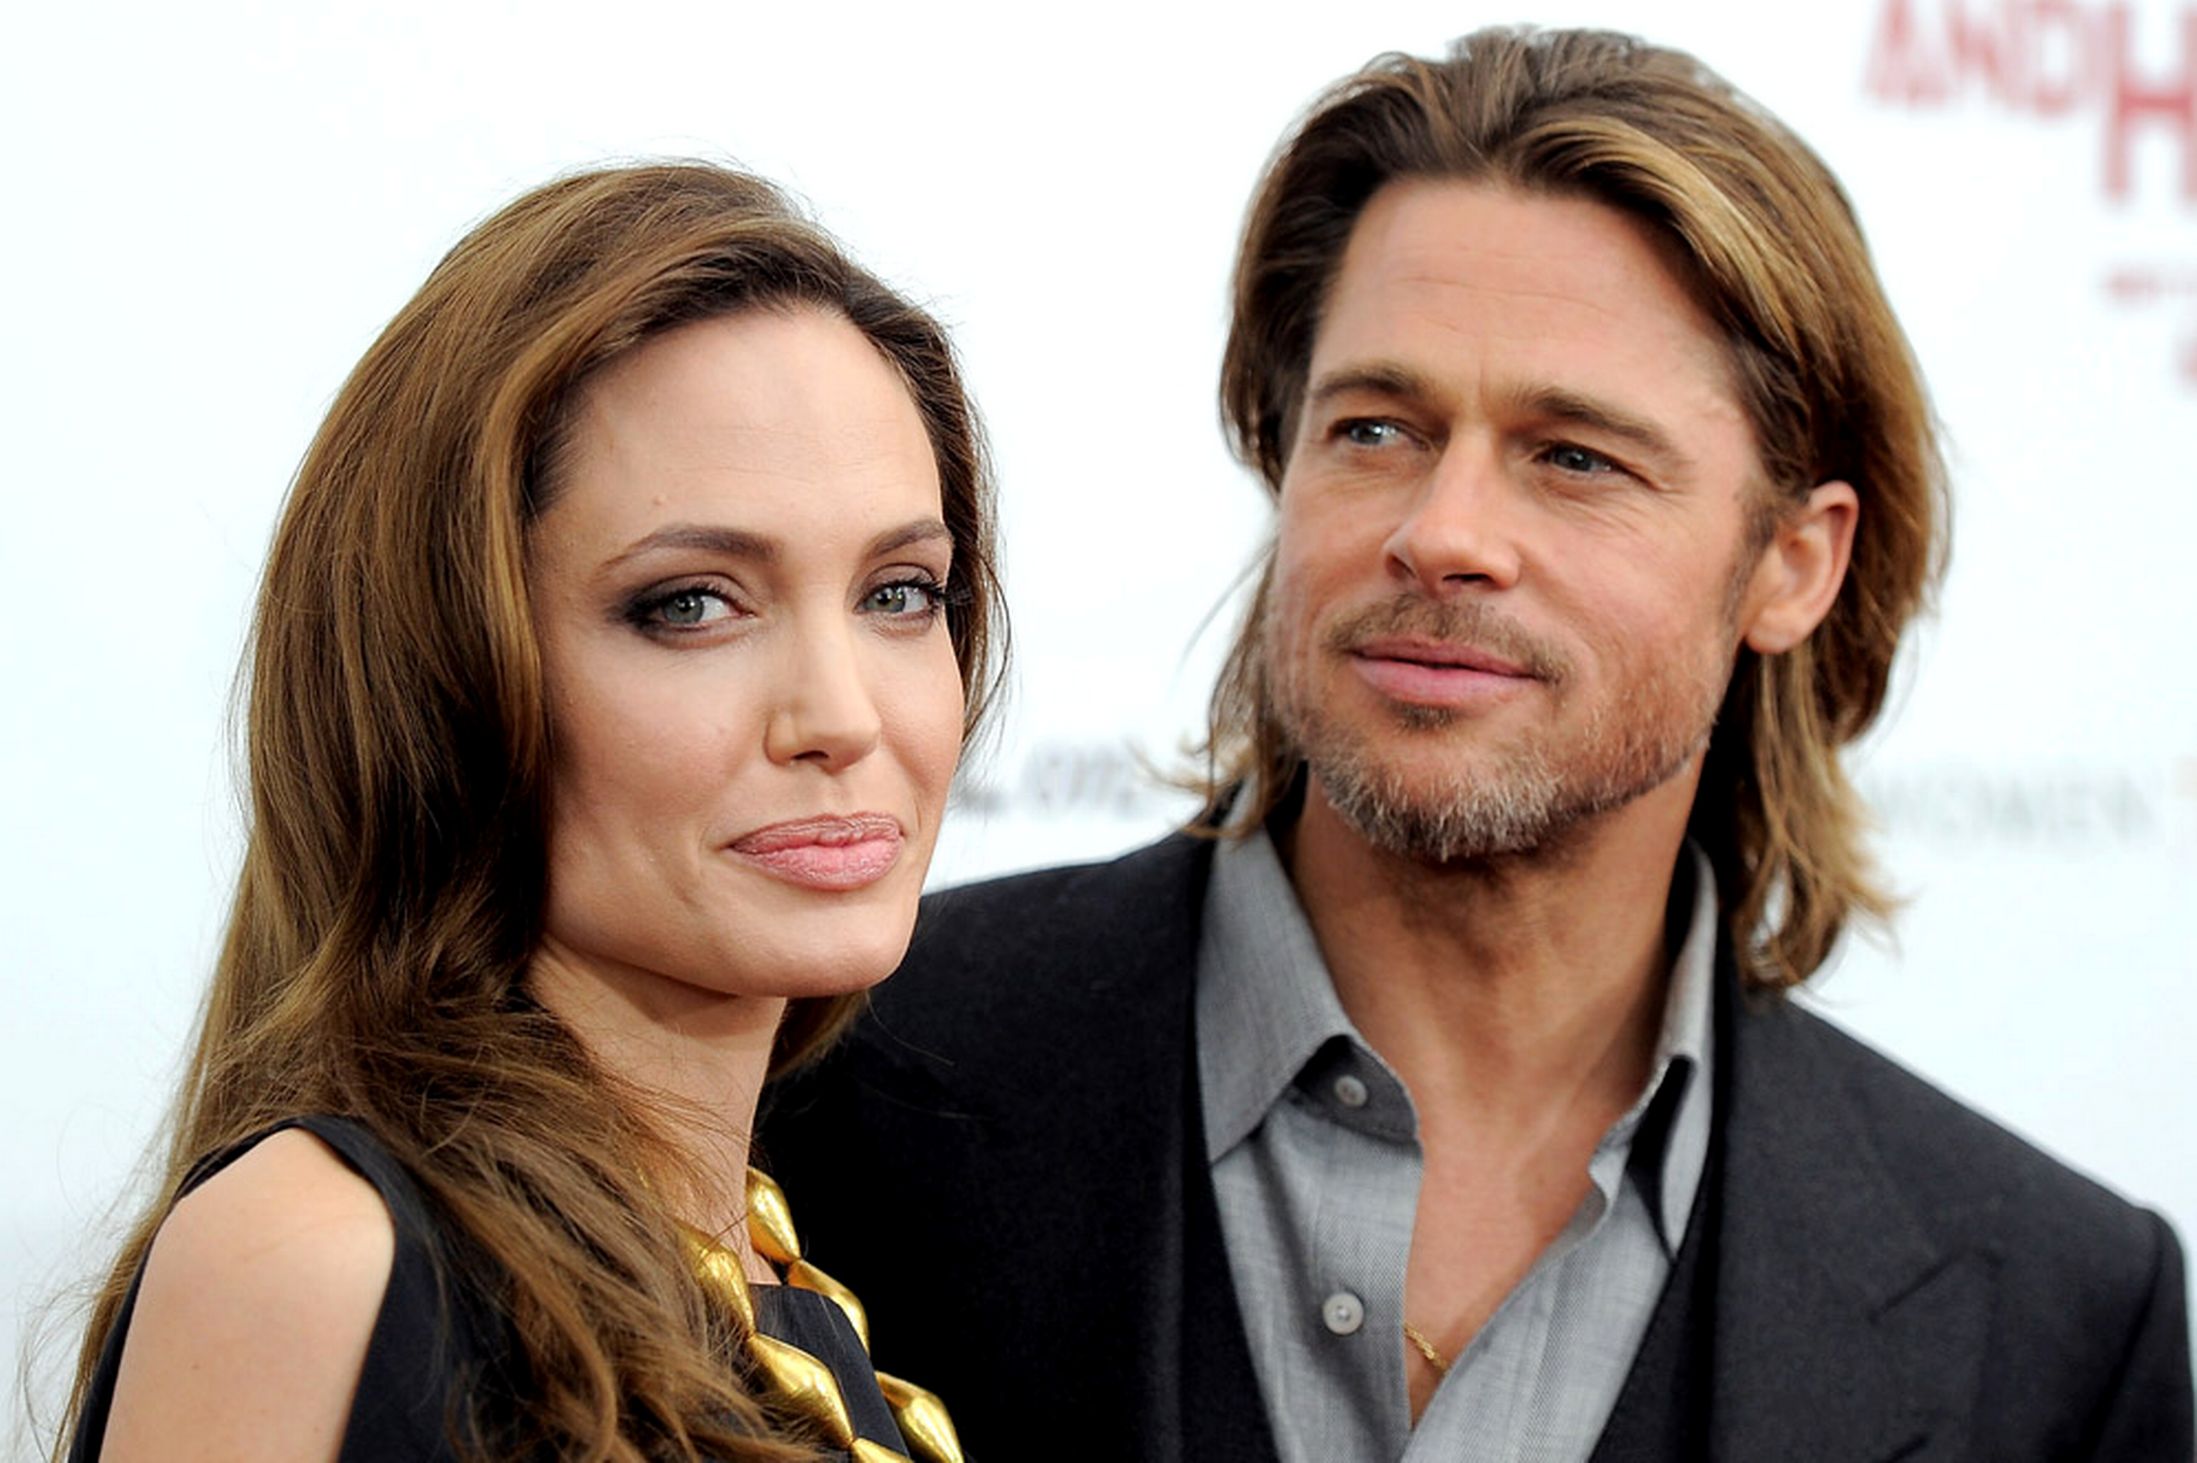 Brad Pitt Bisexual and So Is Angelina Jolie? - Couples Counseling Chicago